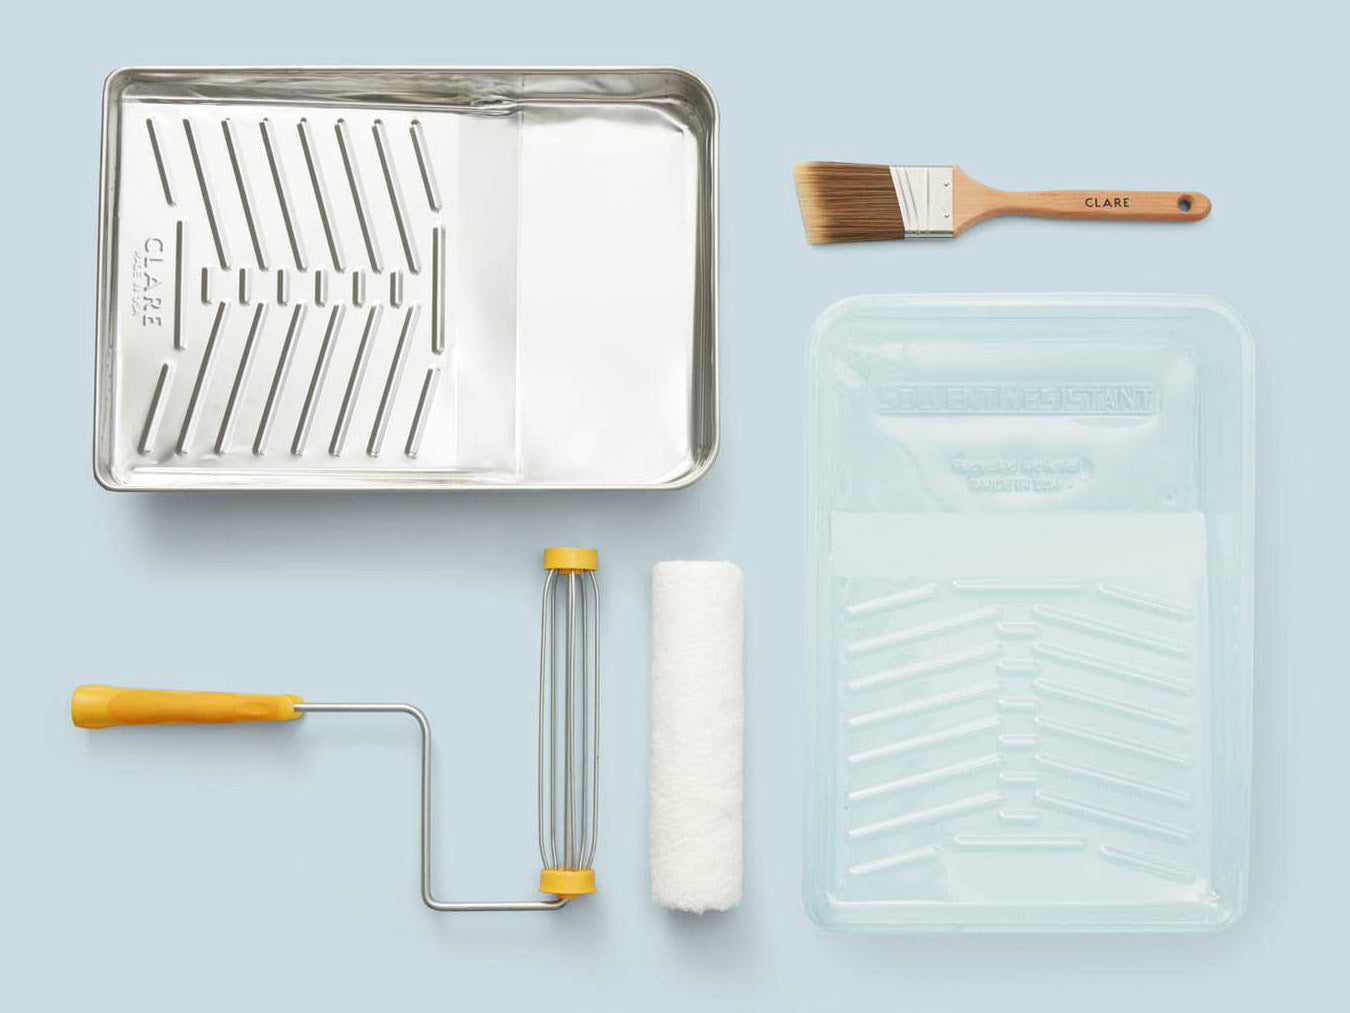 Tips For Re-Using Your Painting Tools - Valu Home Centers